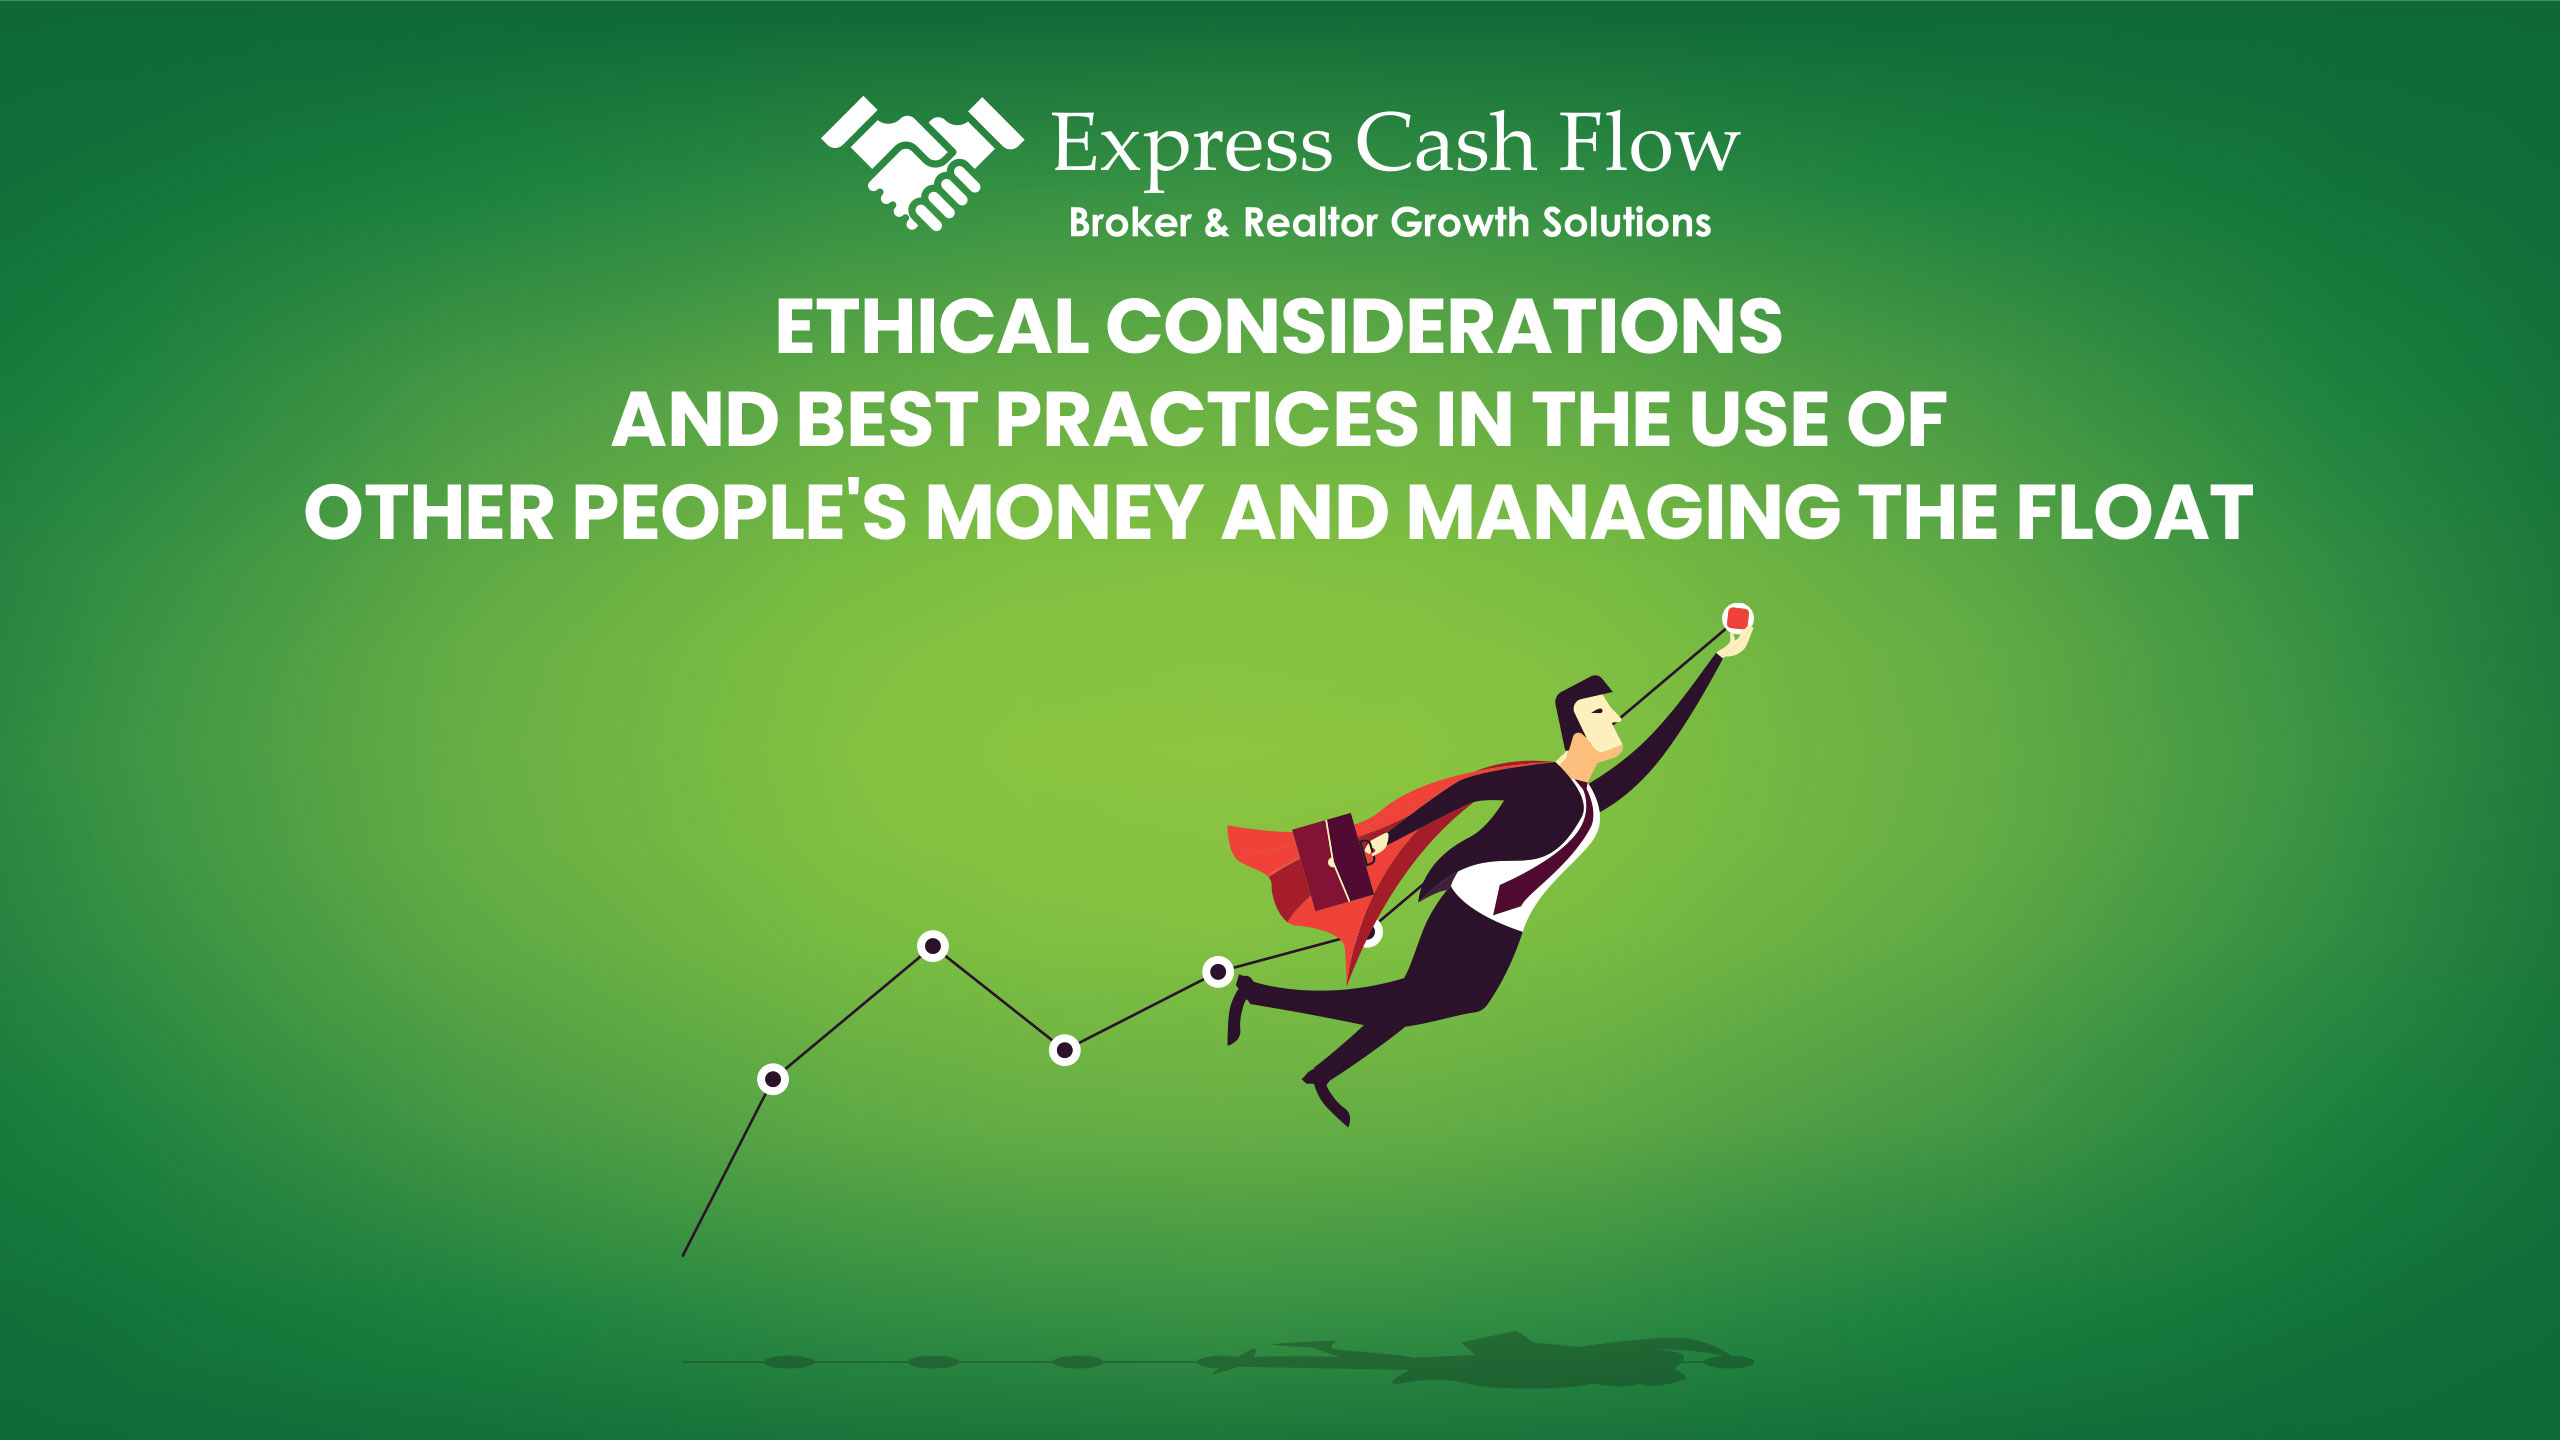 Ethical-Considerations-and-Best-Practices-in-the-Use-of-Other-People's-Money-and-Managing-the-Float